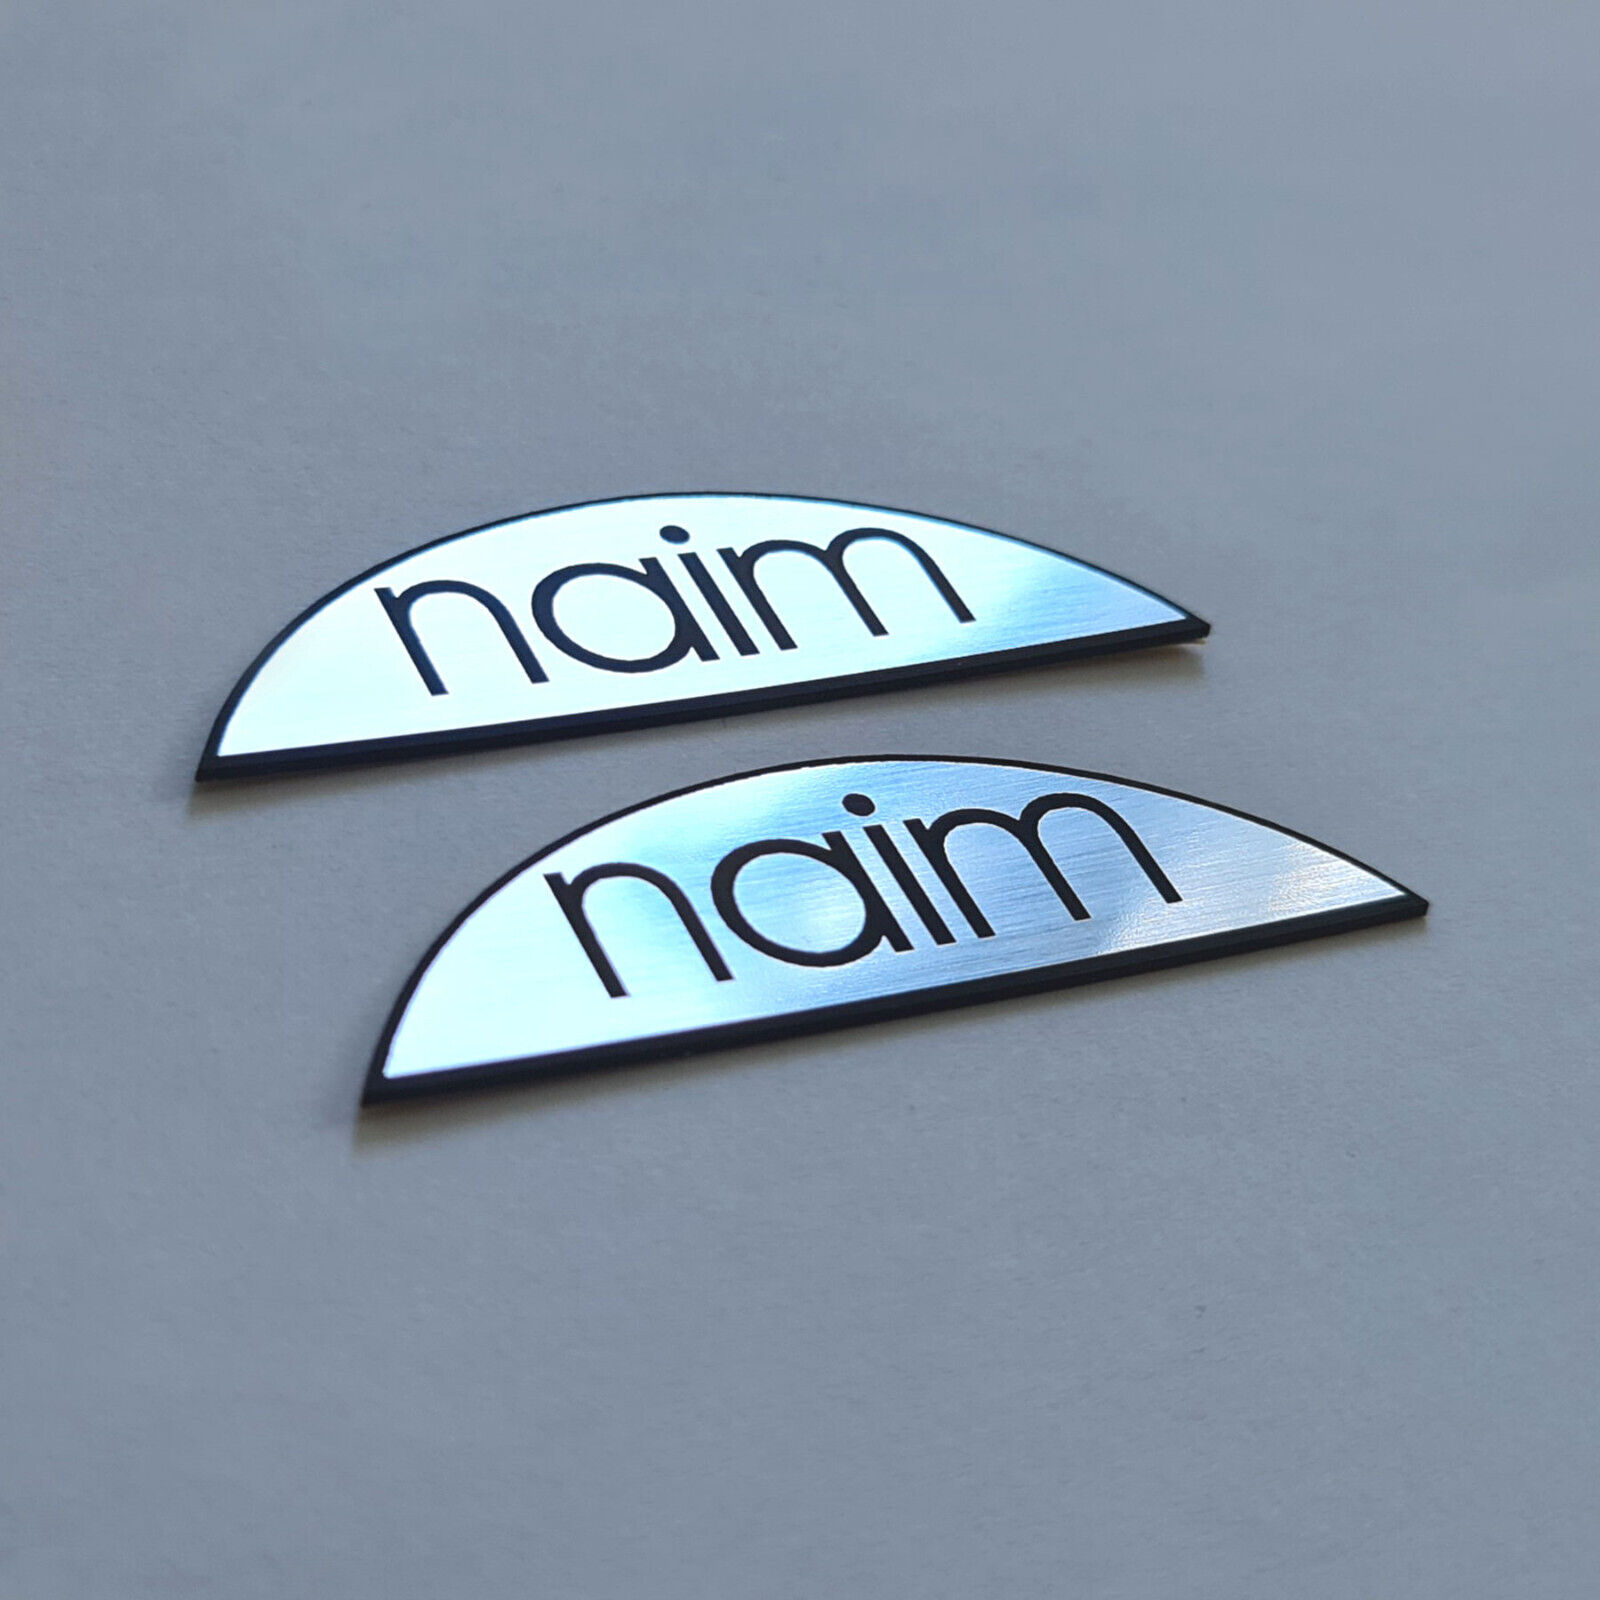 Naim Audio - Sticker Case Badge Decal - Chrome Reflective - Set of Two Pieces